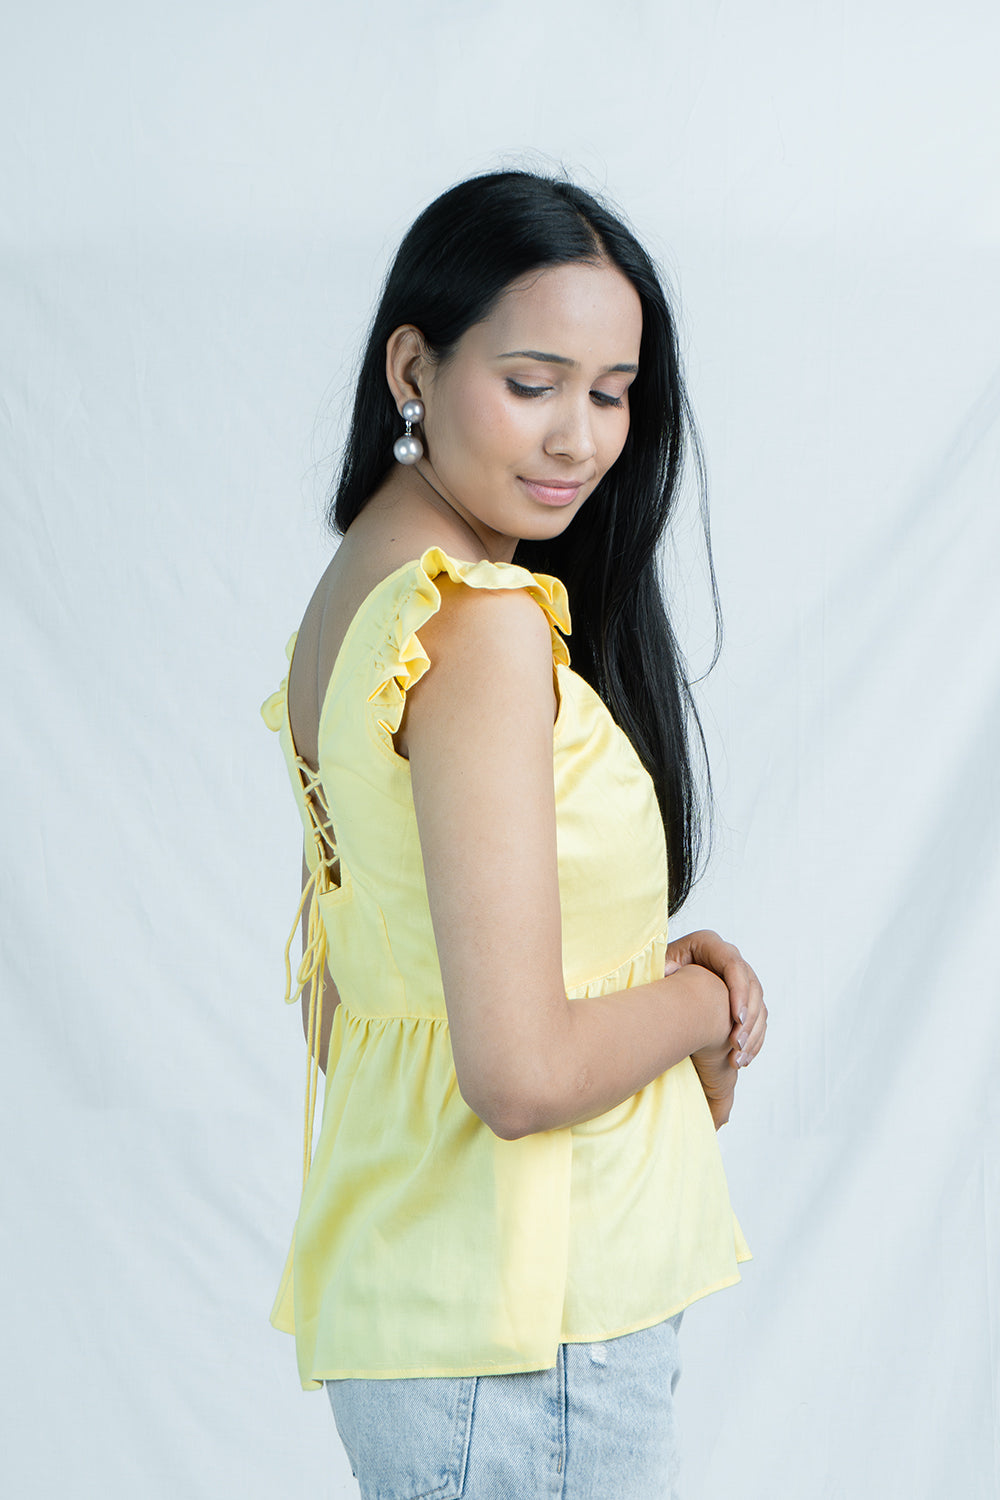 Sunshine Chic: Must-Have Yellow Cotton Top for Effortless Summer Style